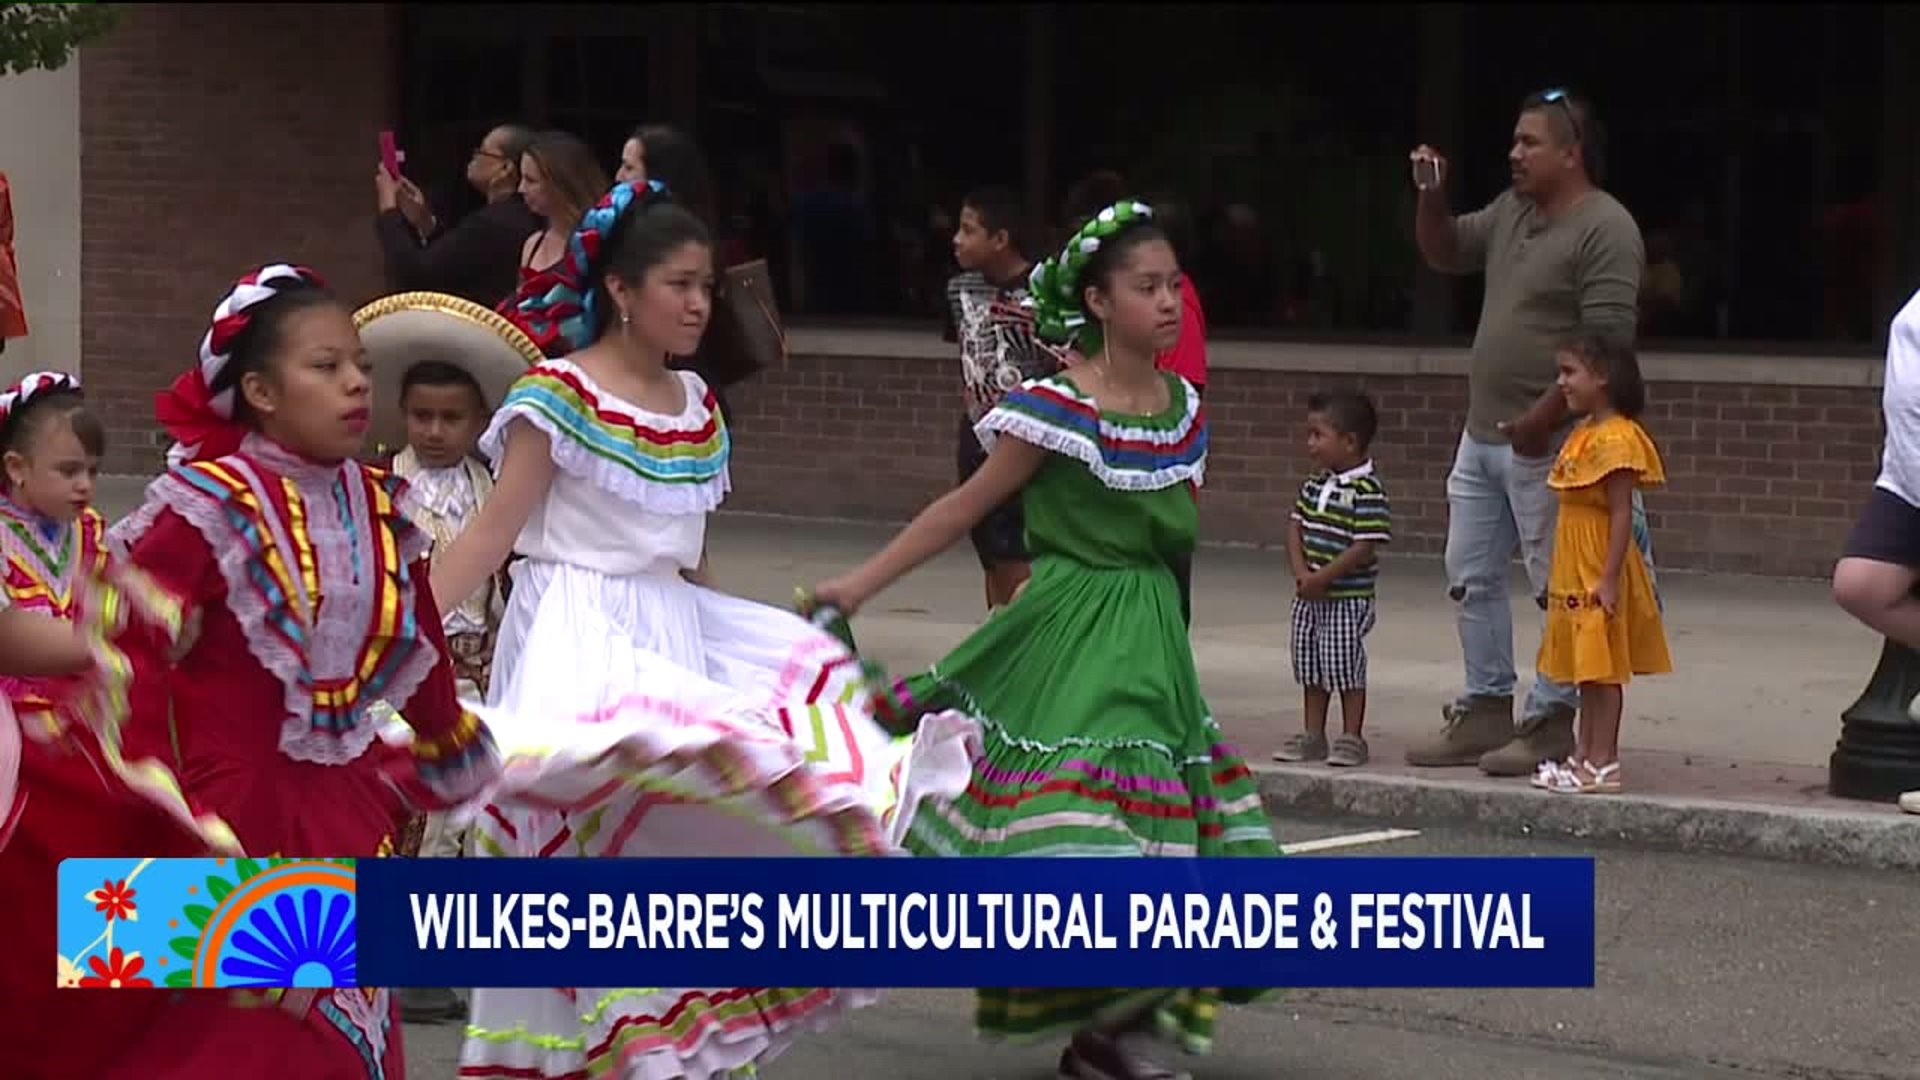 Wilkes-Barre Gears up for Third Annual Multicultural Parade & Festival